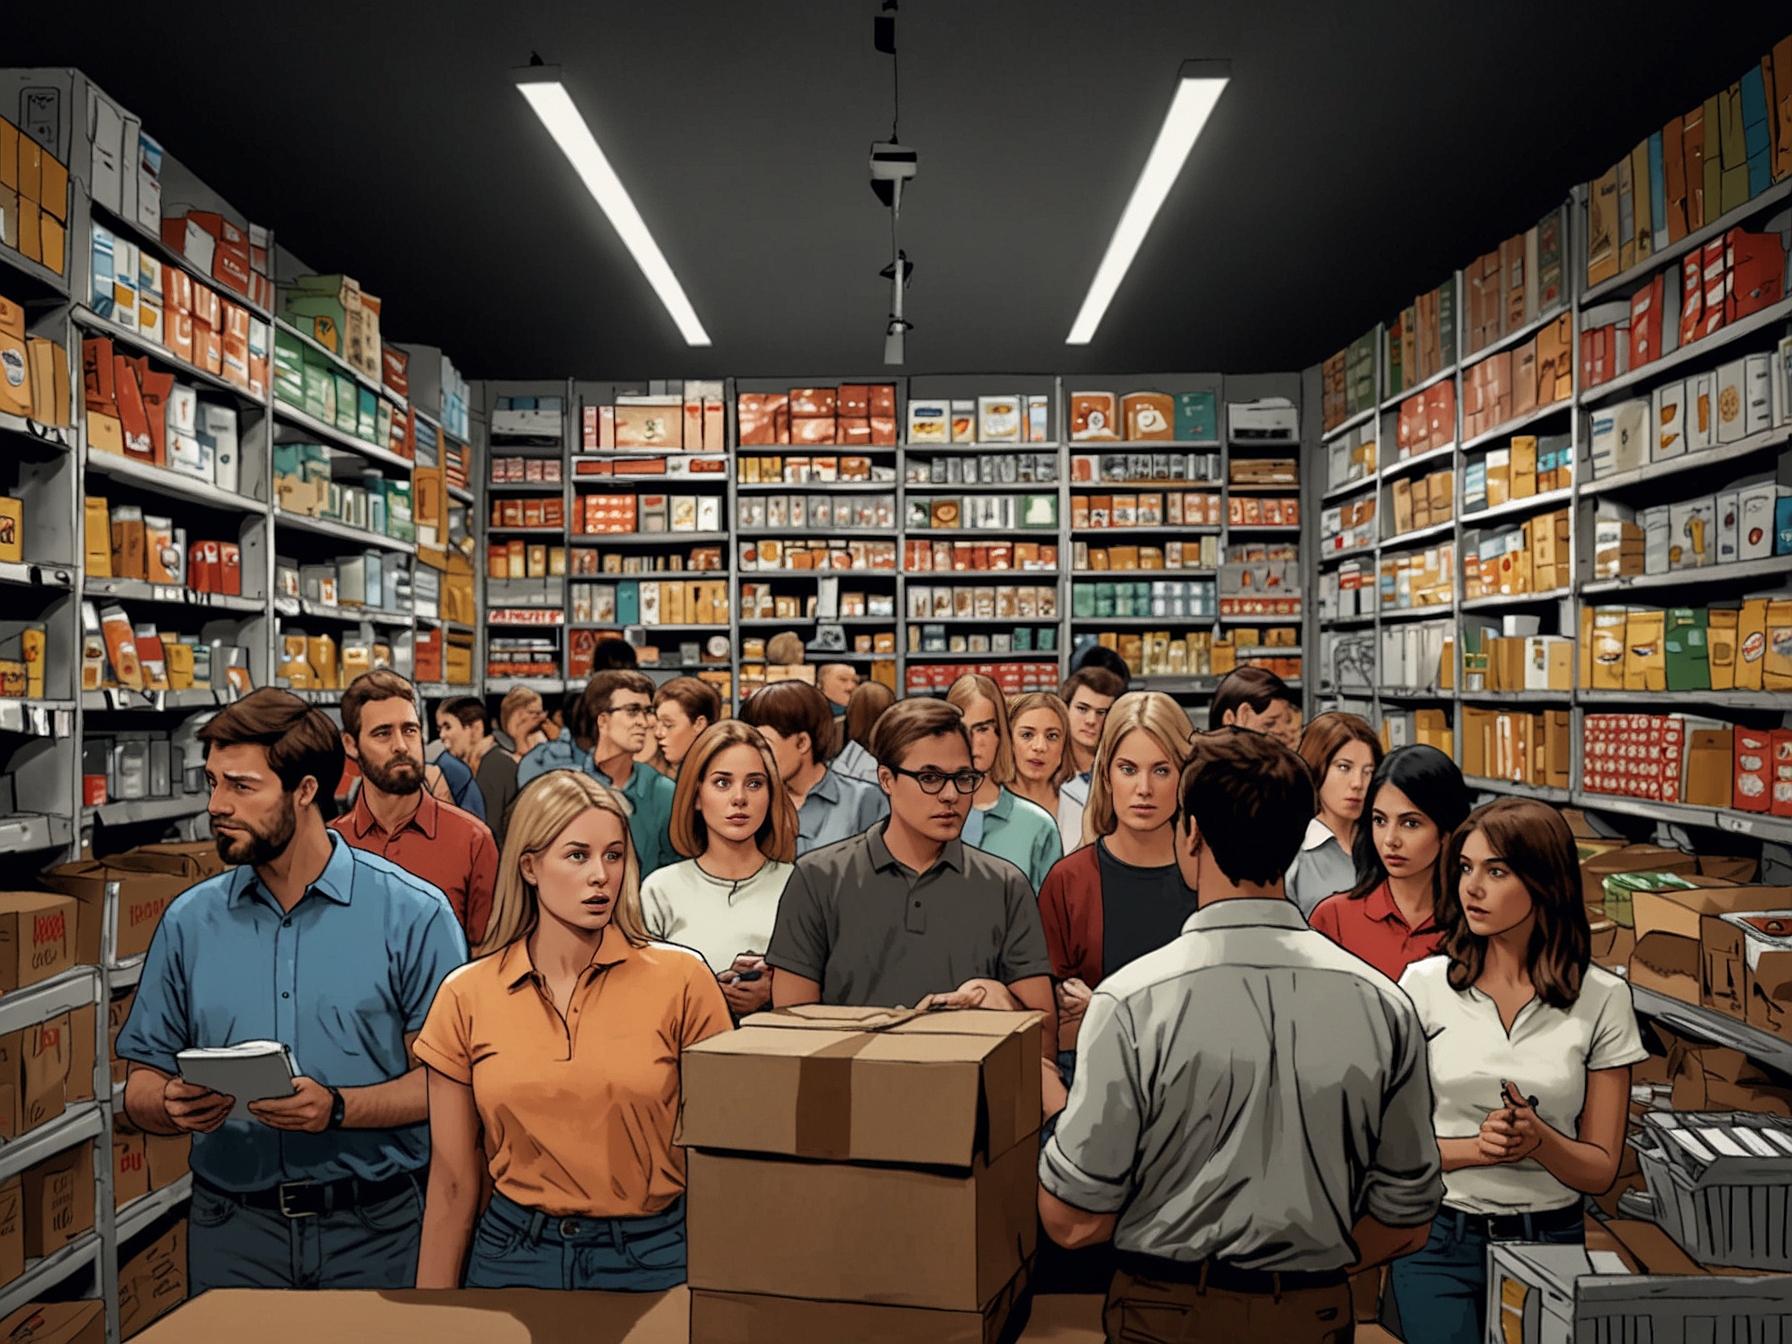 An illustration showing confused consumers surrounded by numerous brands, highlighting the difficulty in discerning genuine CSR efforts from misleading claims.